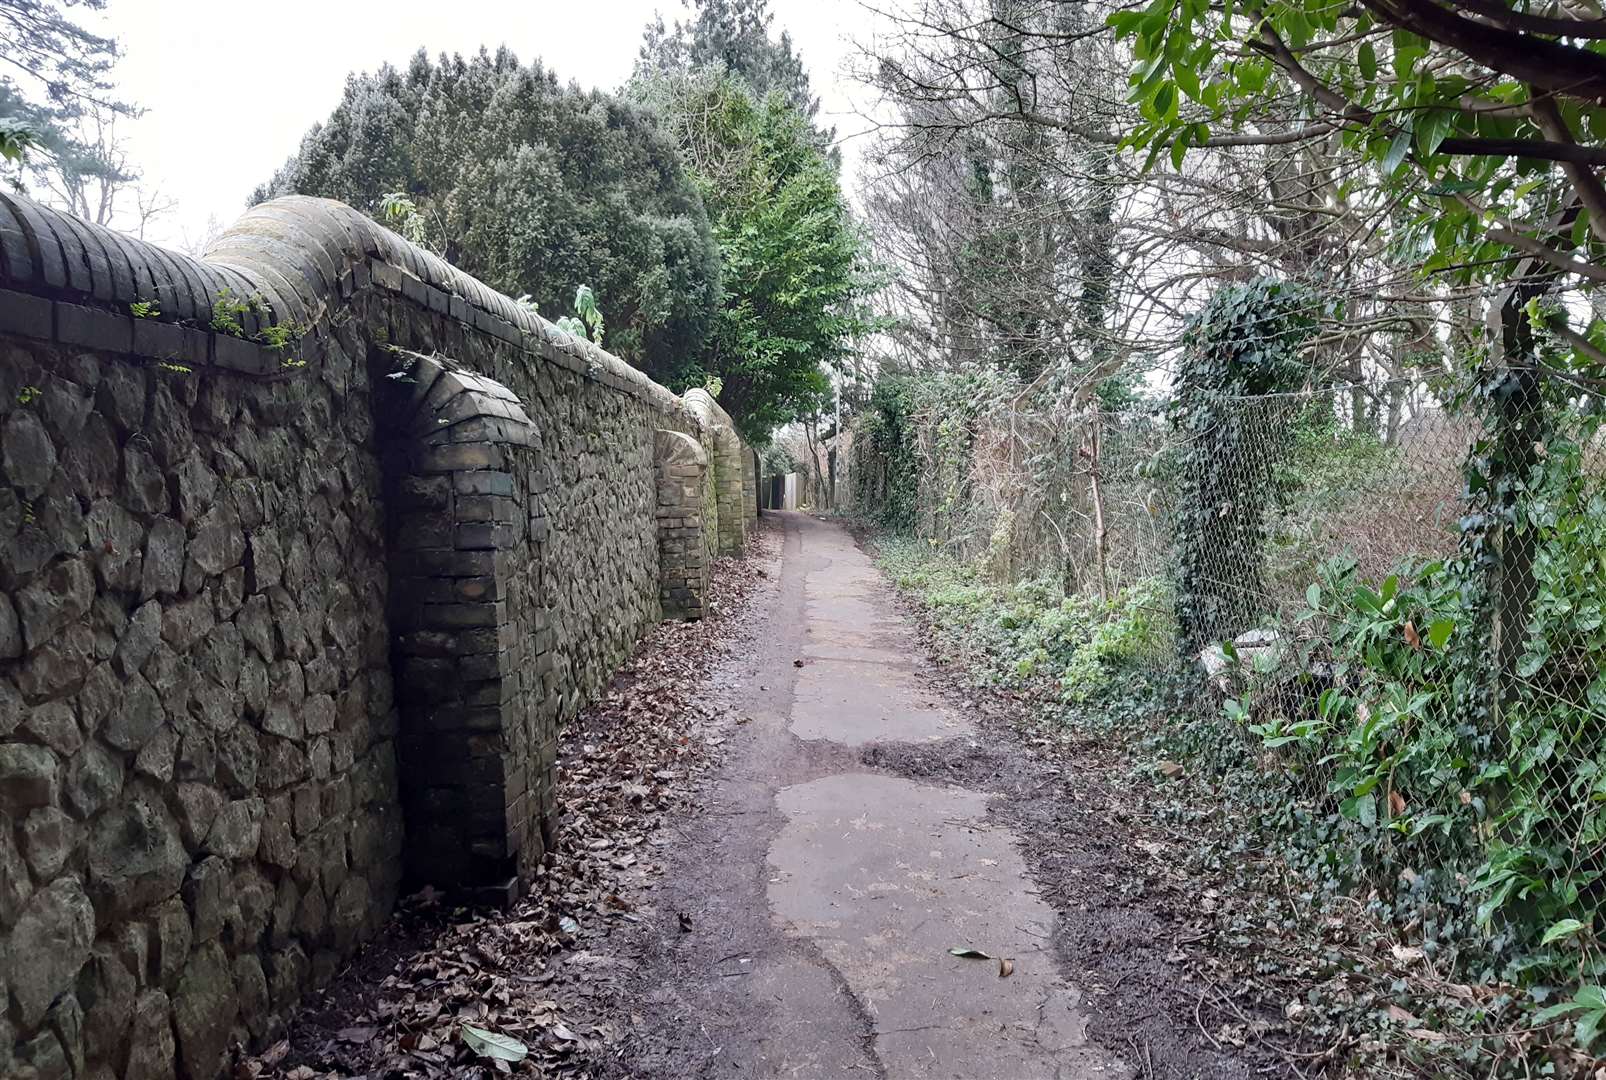 This path runs next to the site, linking Heathfield Road with Lower Queens Road